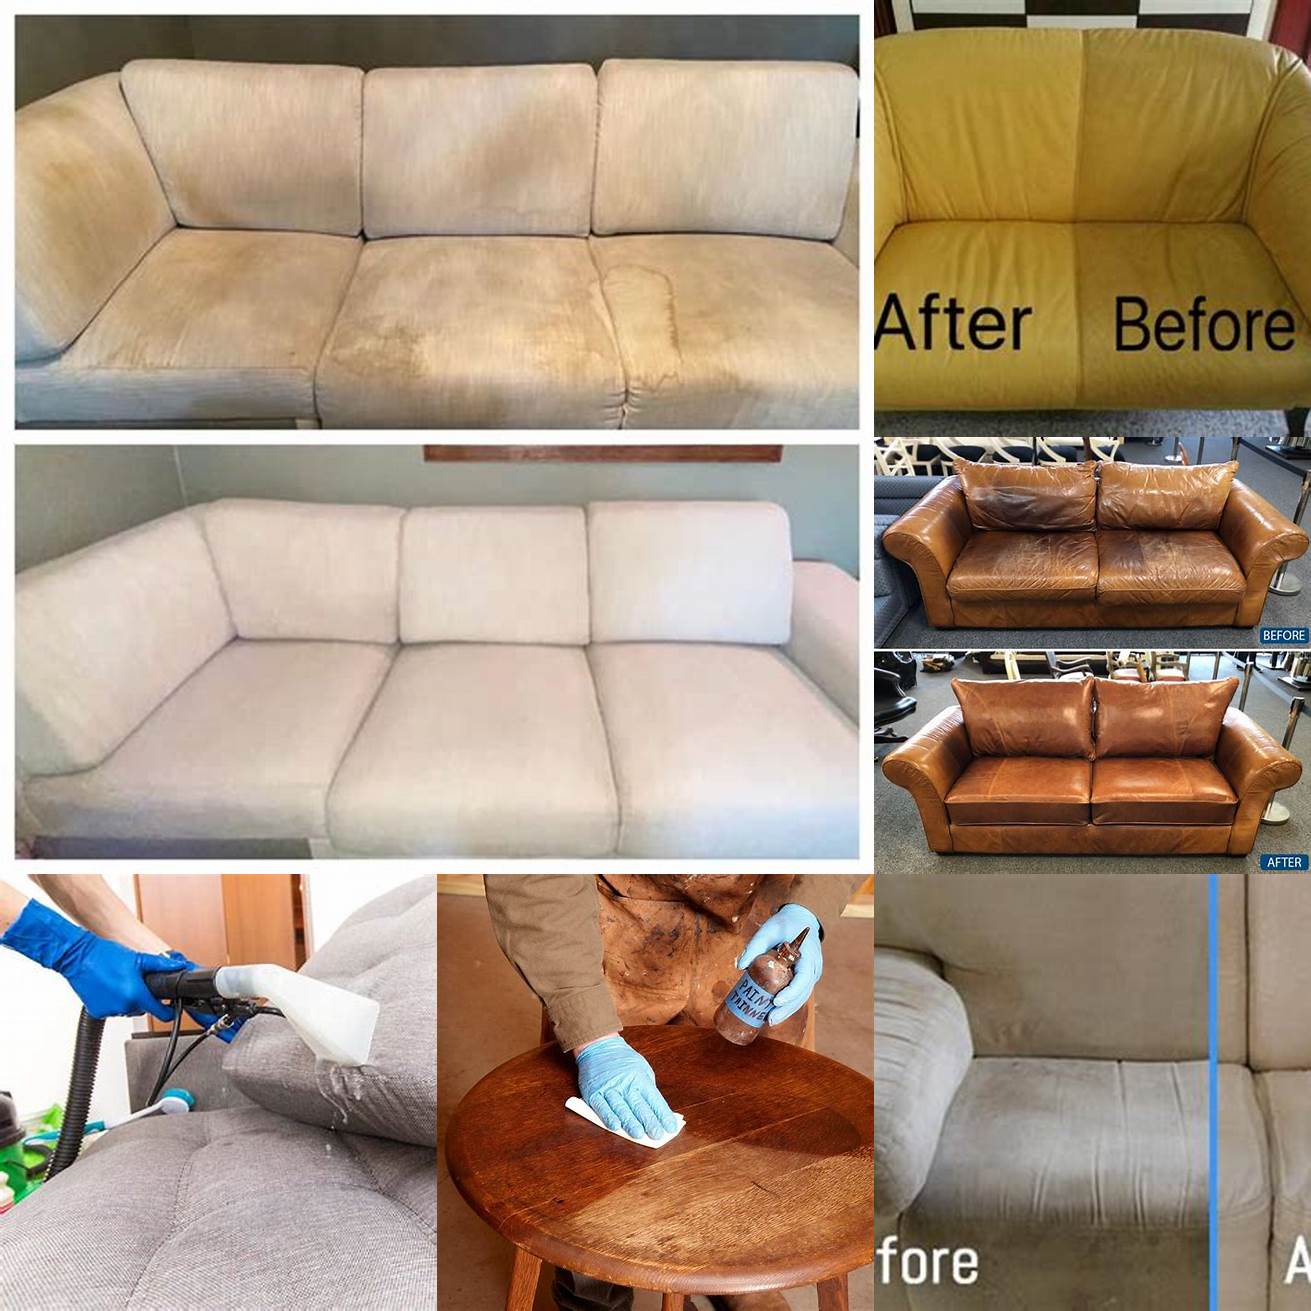 Before and After Cleaning Photos